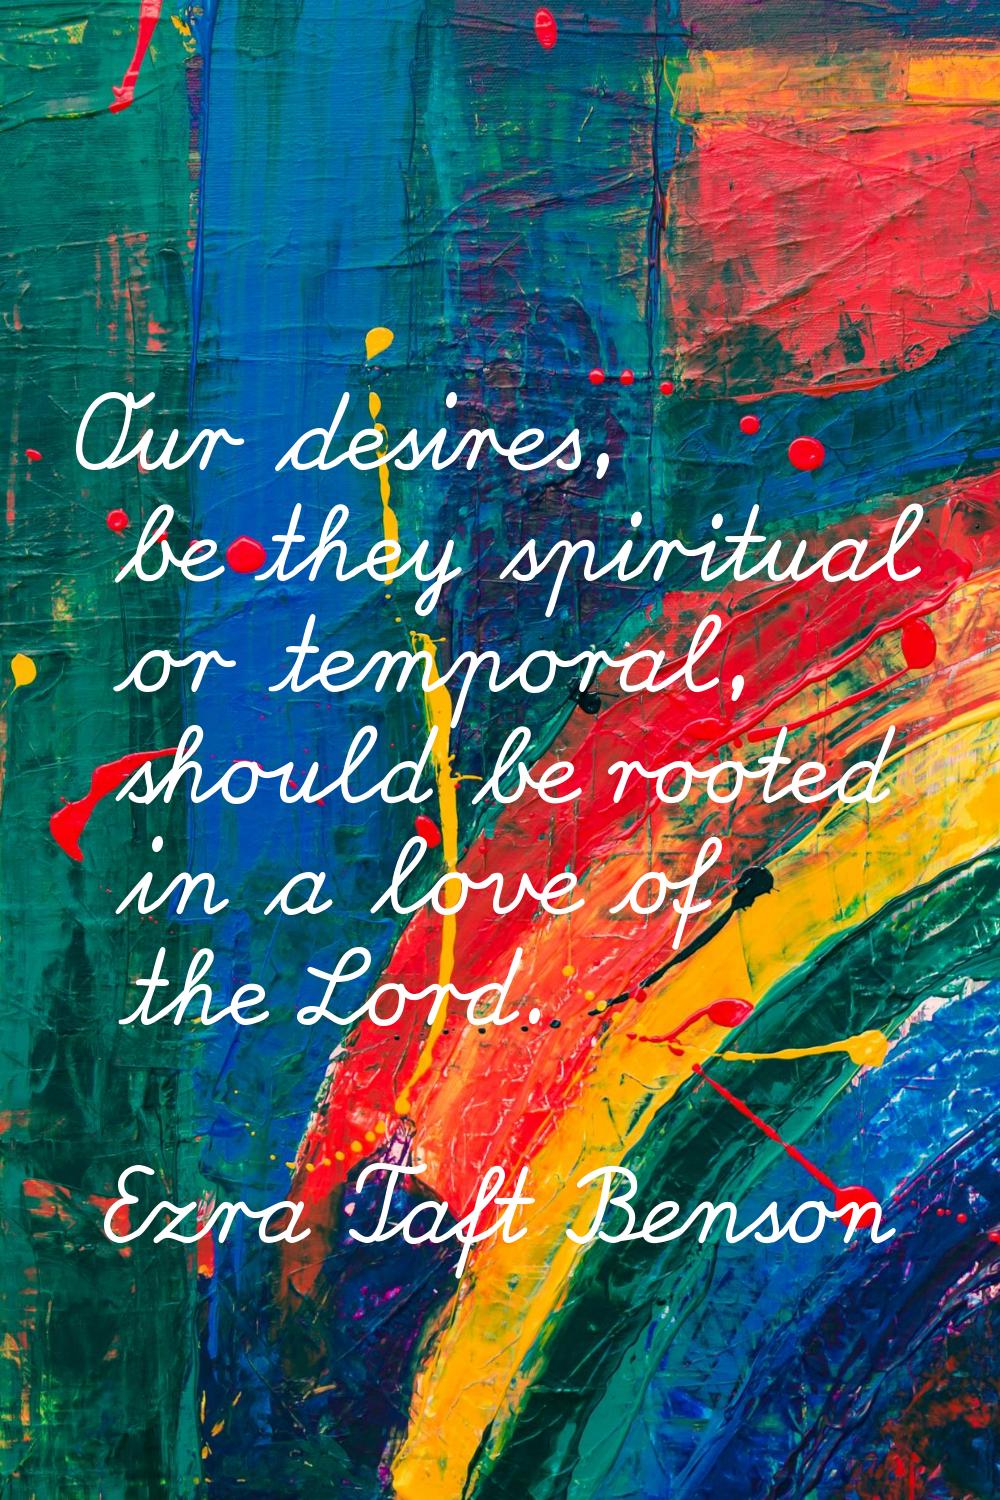 Our desires, be they spiritual or temporal, should be rooted in a love of the Lord.